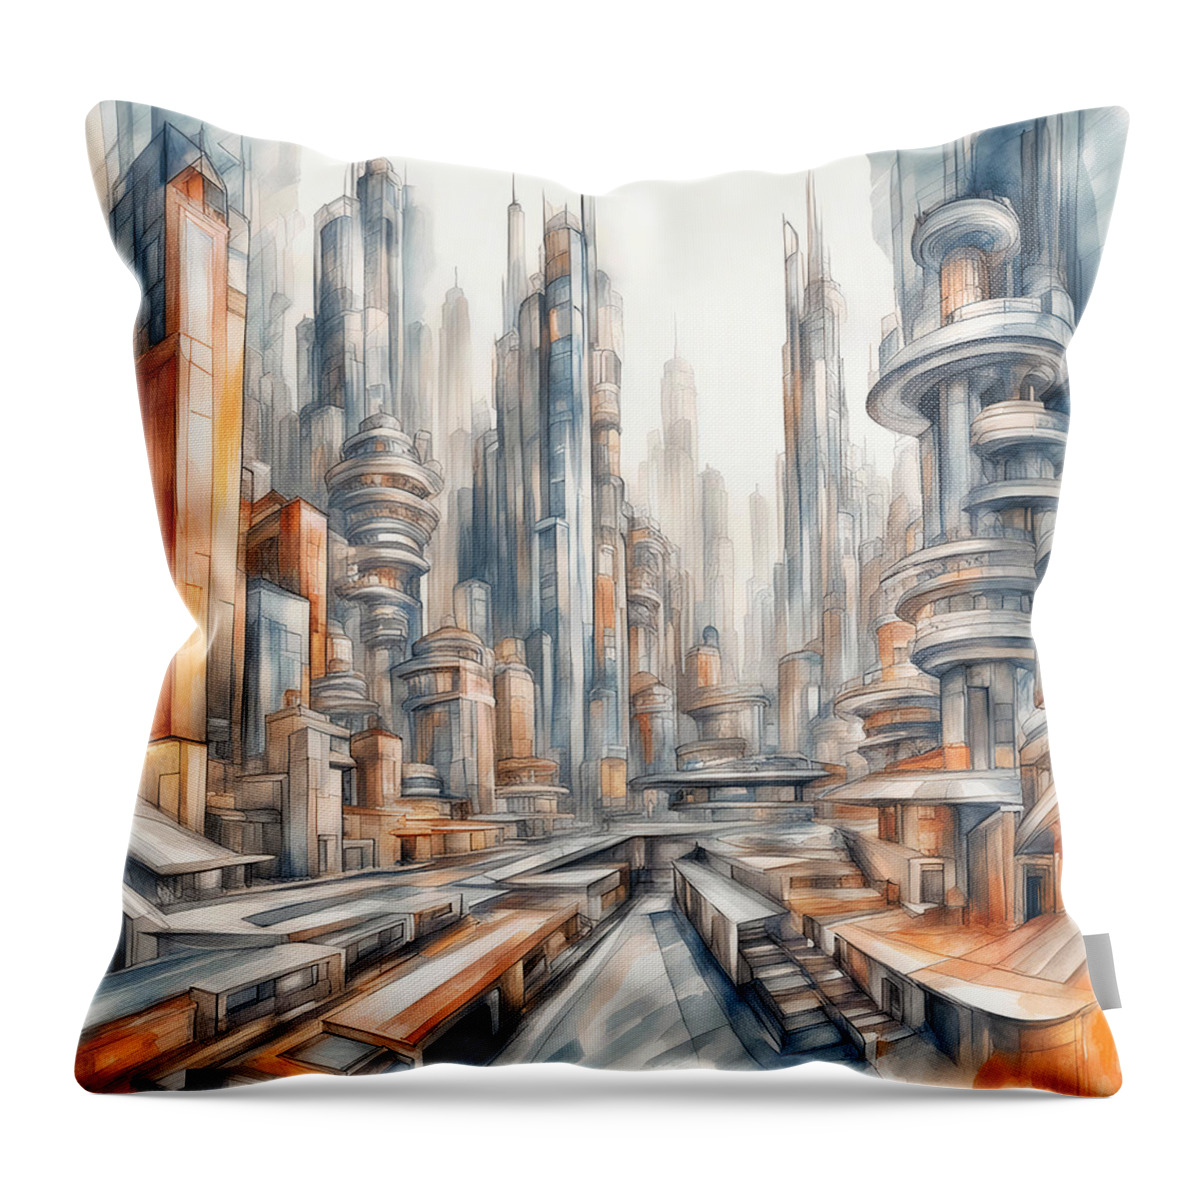 Abstract Throw Pillow featuring the painting Futuristic City by Mounir Khalfouf